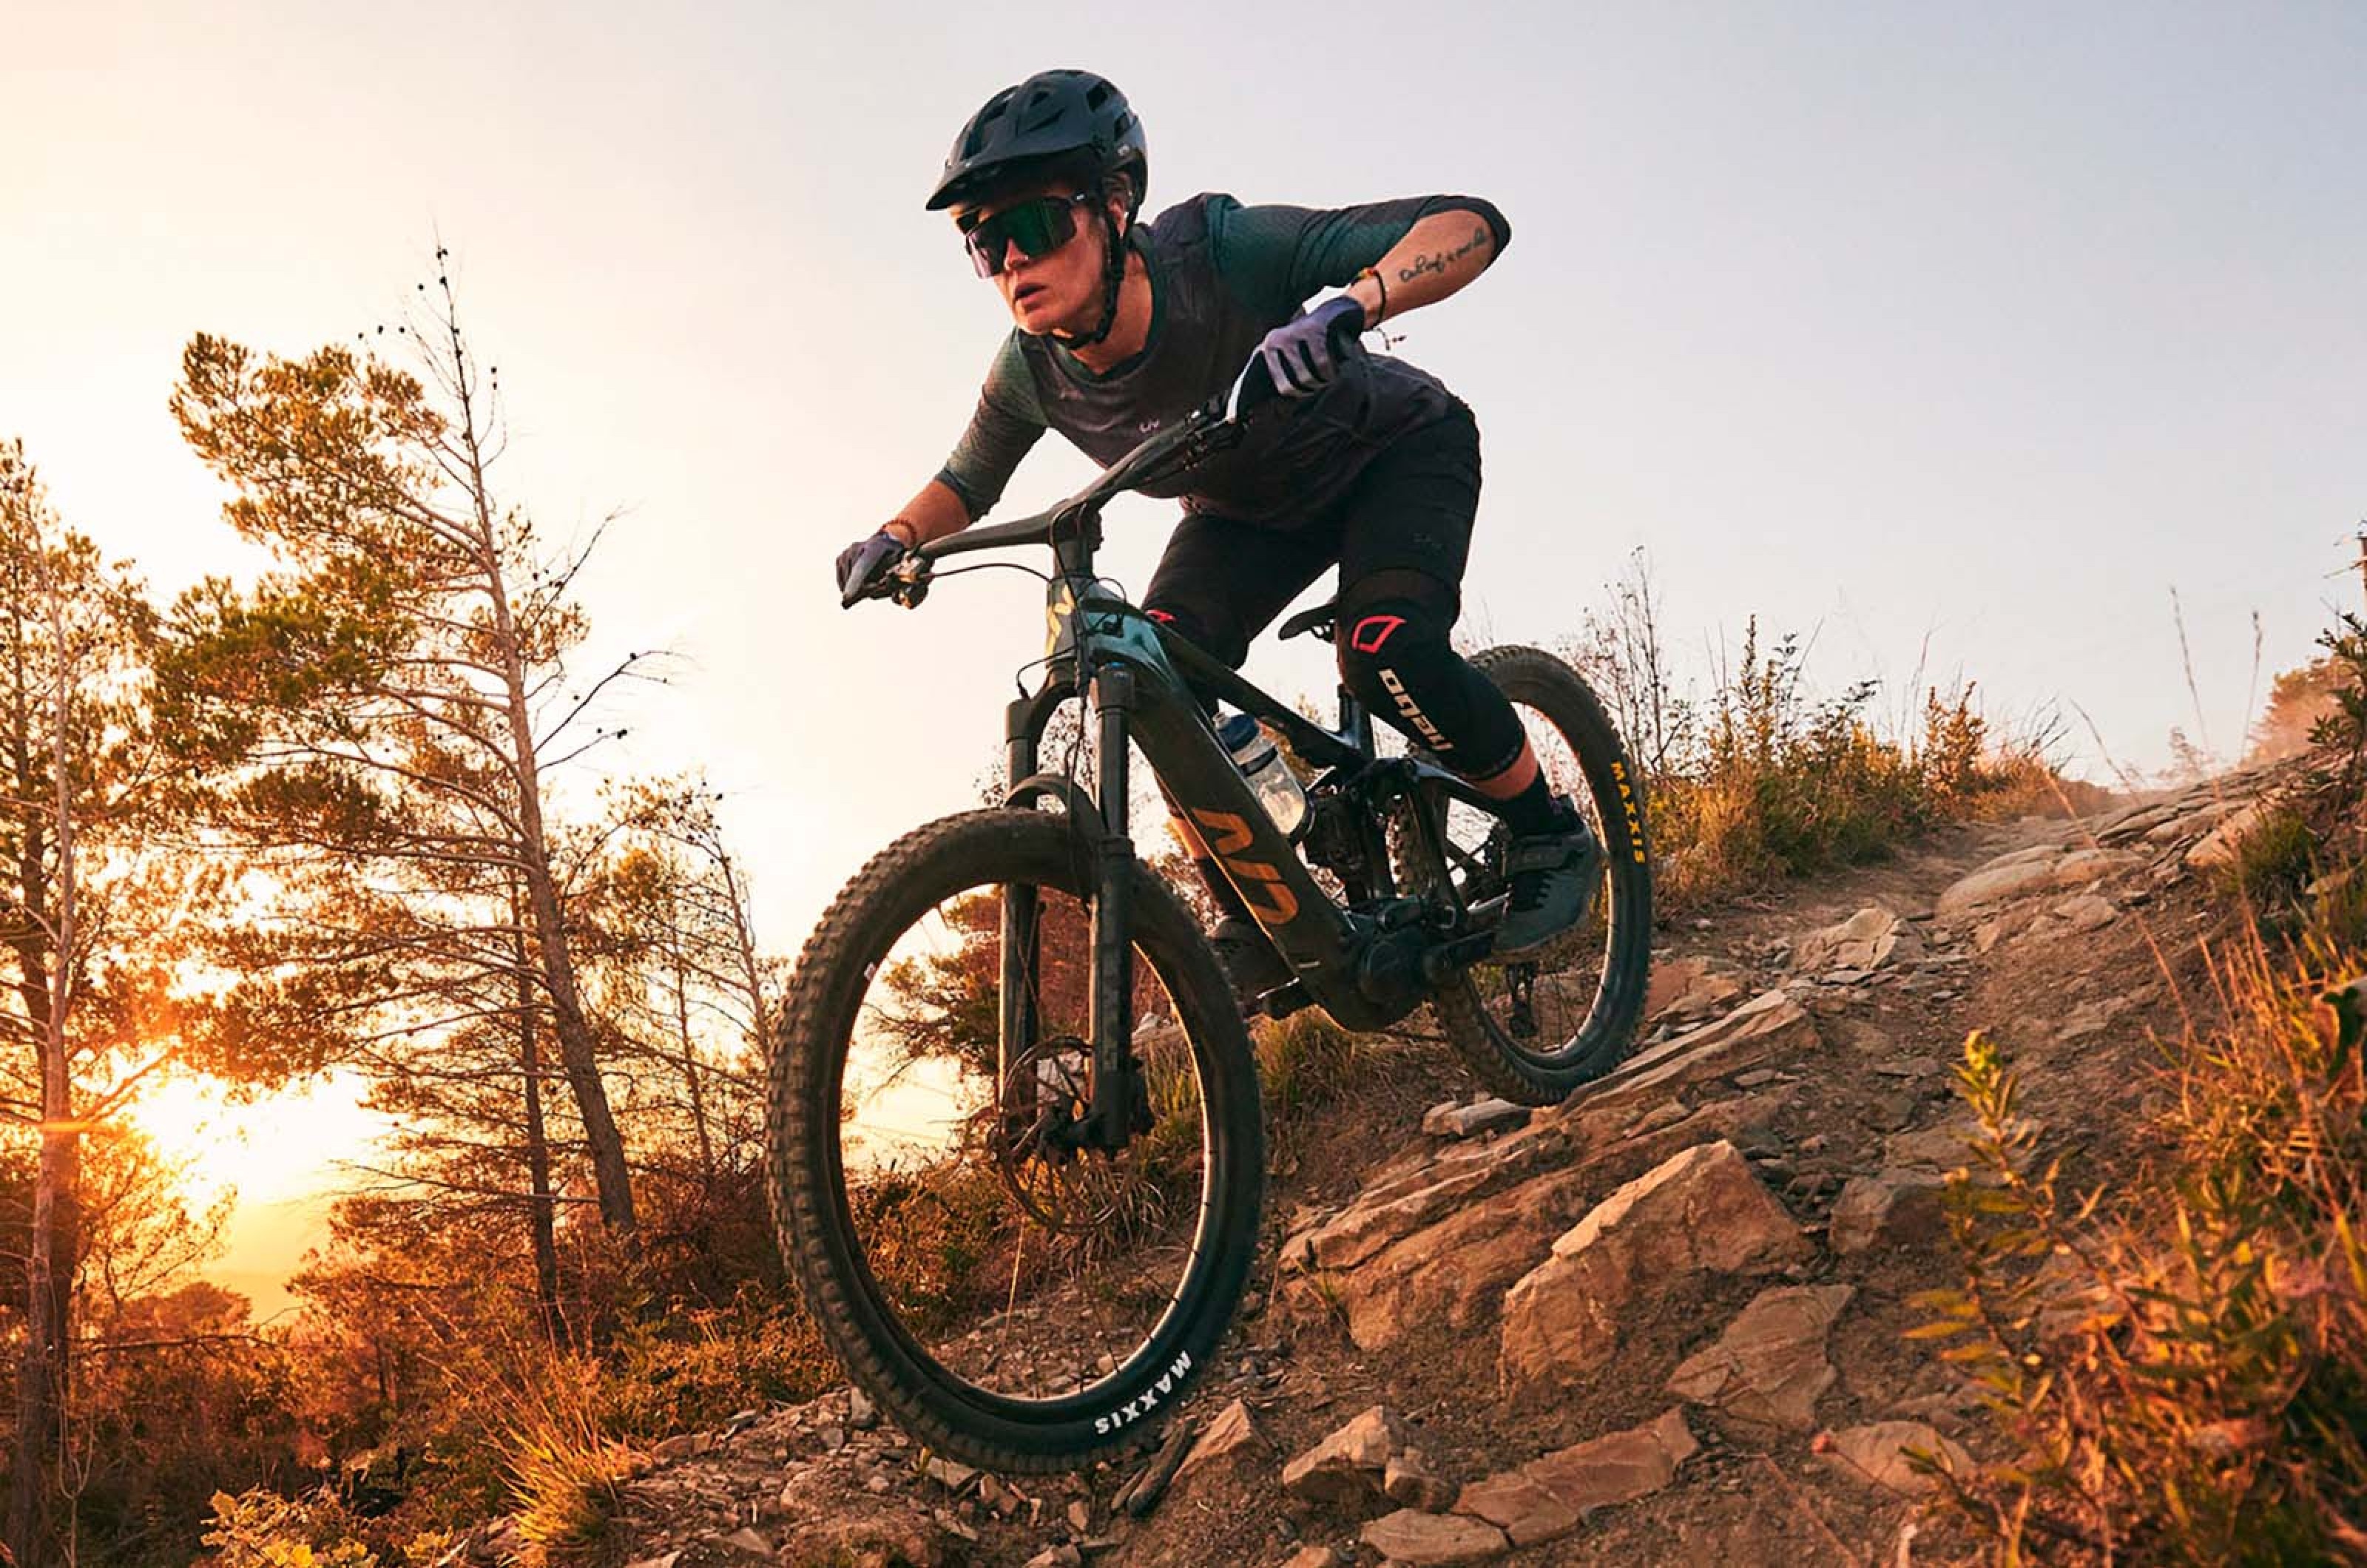 <p>If you want something women’s specific and lightweight, then the new Liv Intrigue X Advanced E+ Elite is worth consideration. It’s been described as being agile and capable, and it weighs a claimed 18.8kg (in size S), which for an eMTB is pretty good.</p>  <p>It uses Yamaha’s SyncDrive Pro2 motor which provides up to 85Nm of torque, paired with a 400Wh battery. It comes with 140mm rear travel and a 150mm fork, and combined with a mullet wheel setup, it certainly appears capable on paper.</p>